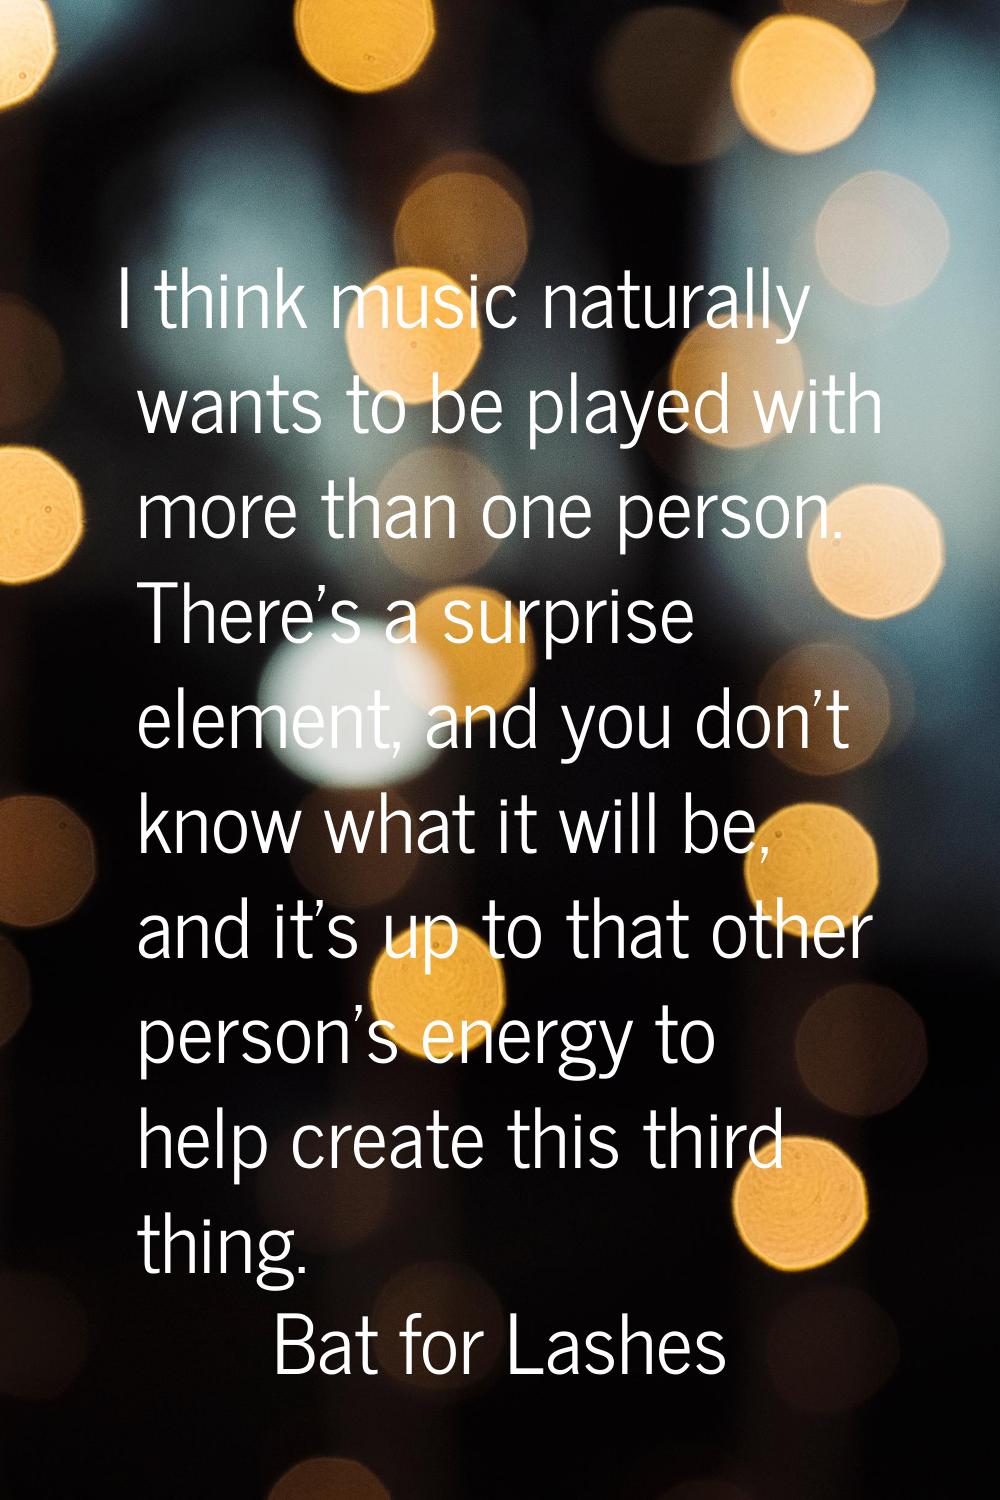 I think music naturally wants to be played with more than one person. There's a surprise element, a